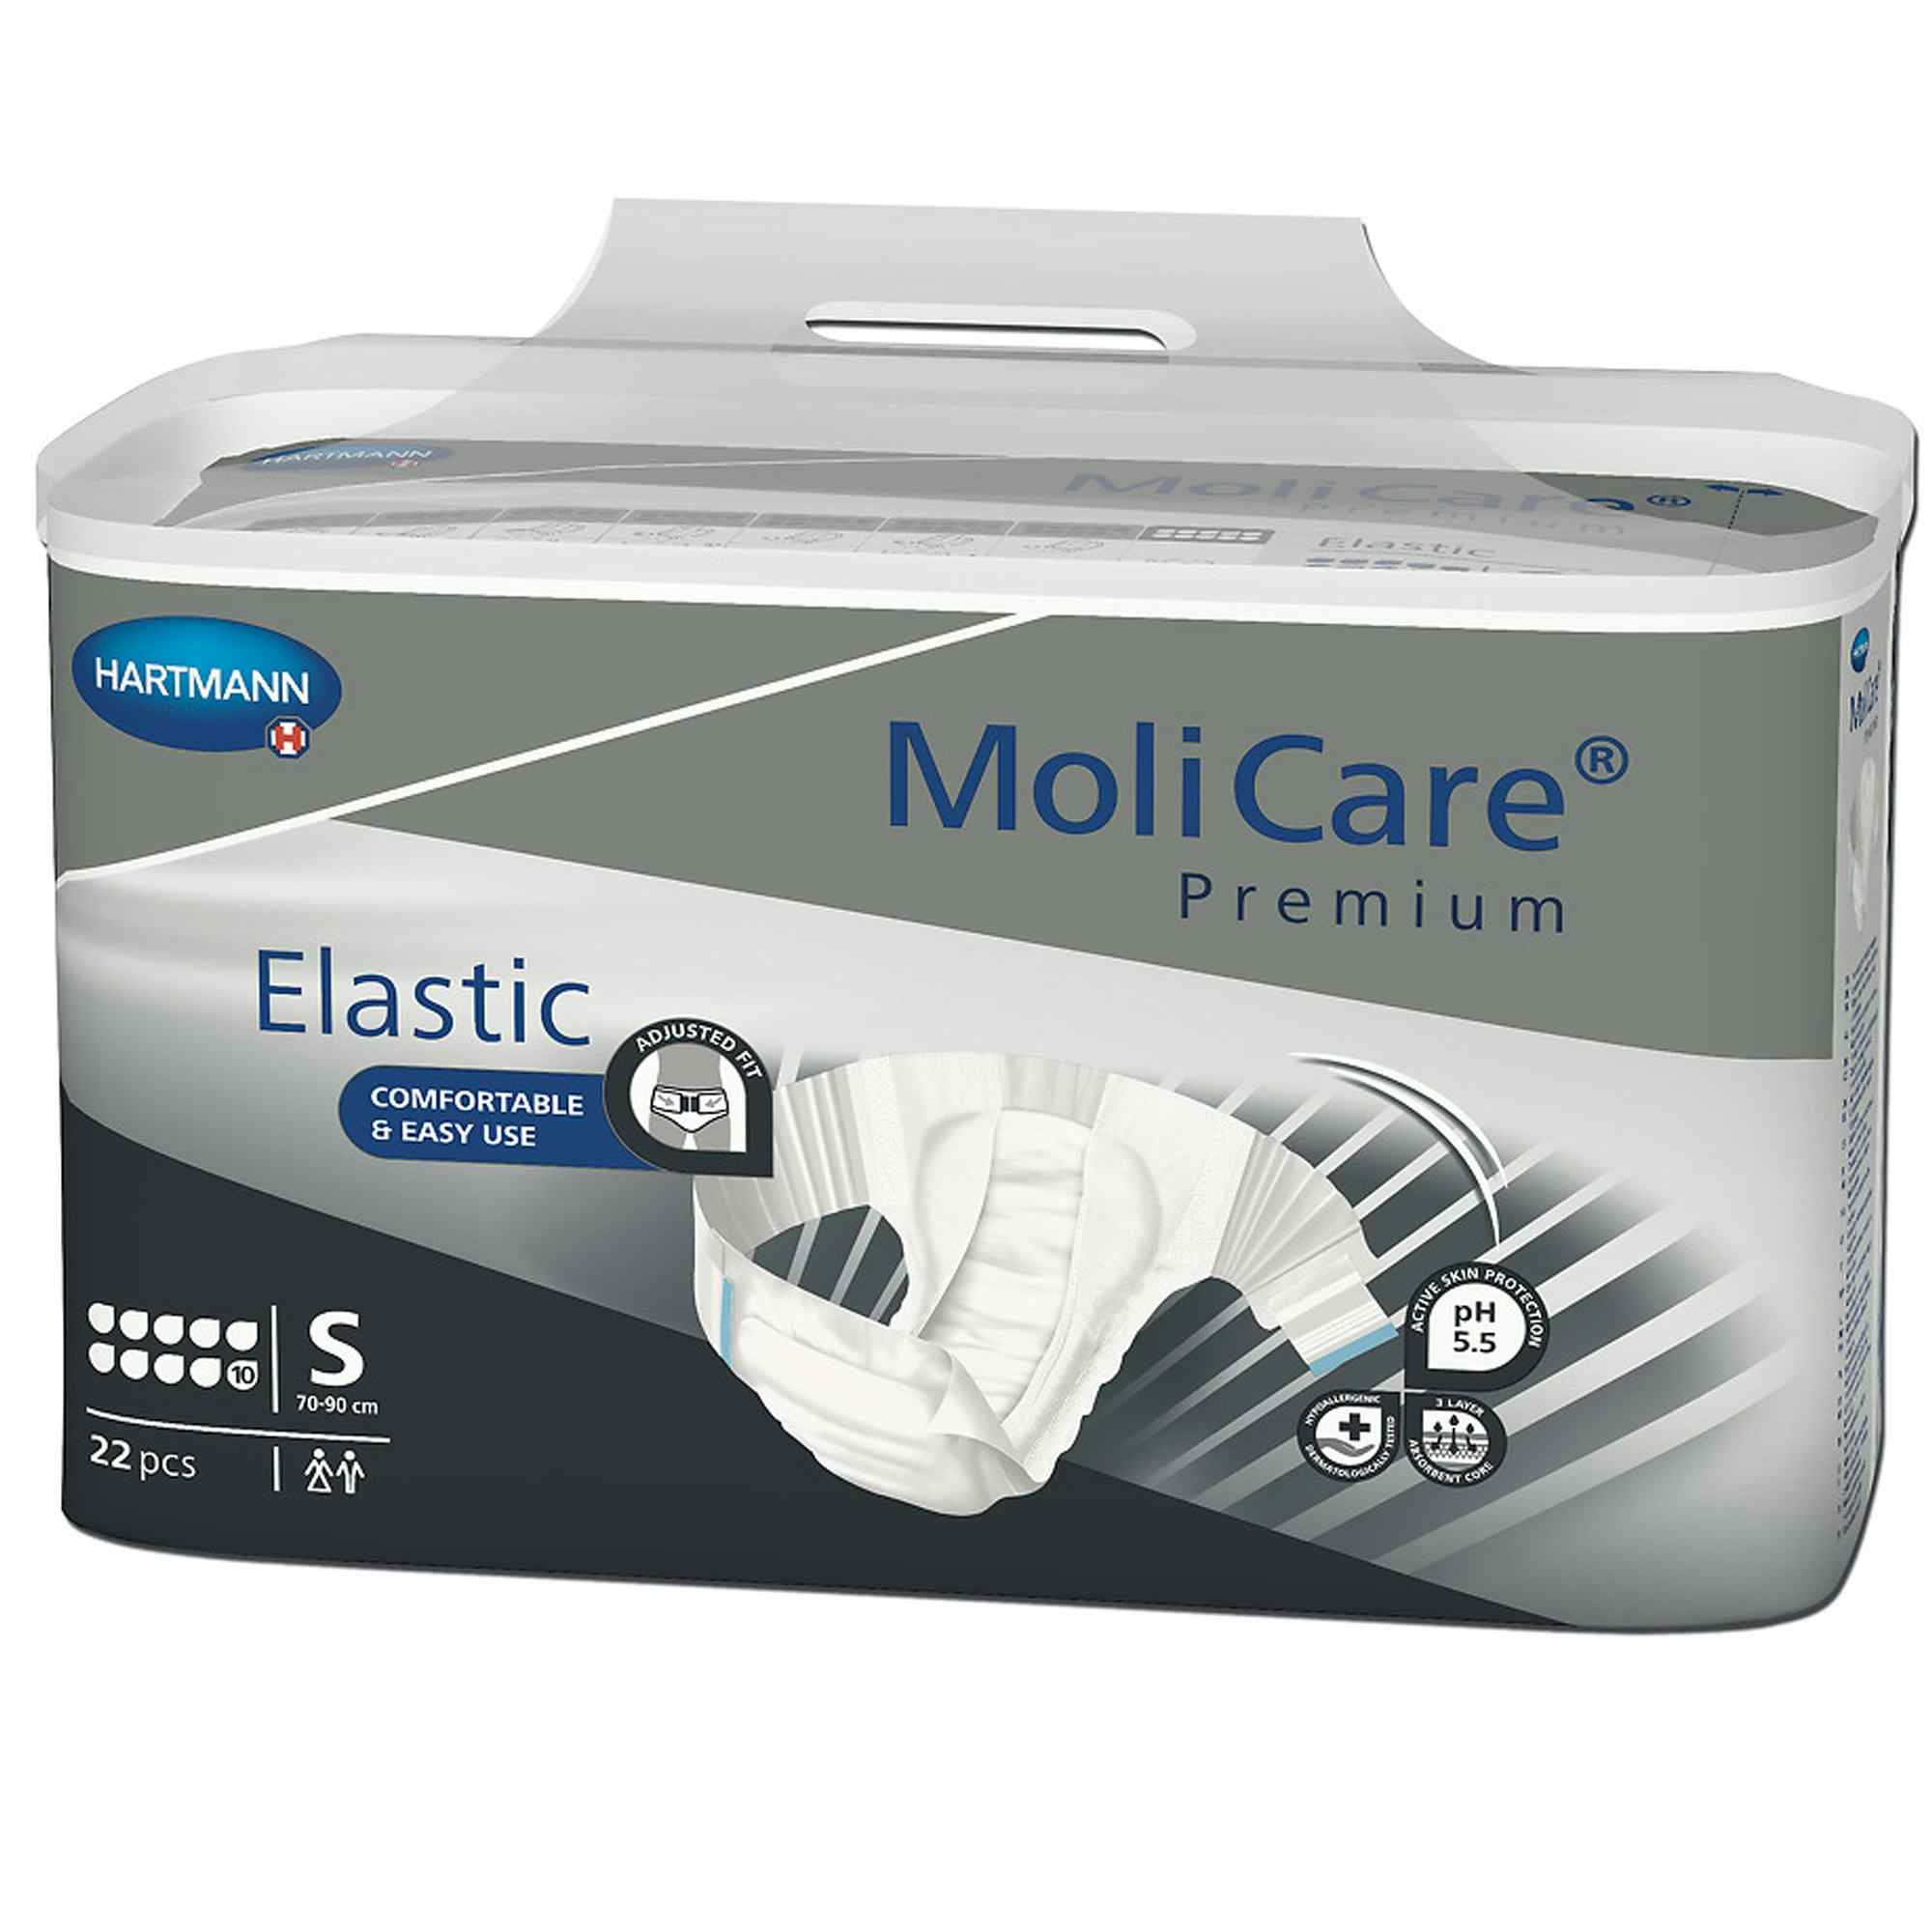 MoliCare Premium 10D Disposable Brief Adult Diapers with Tabs, Heavy Absorbency, 165671, Small (27-35") - Pack of 22